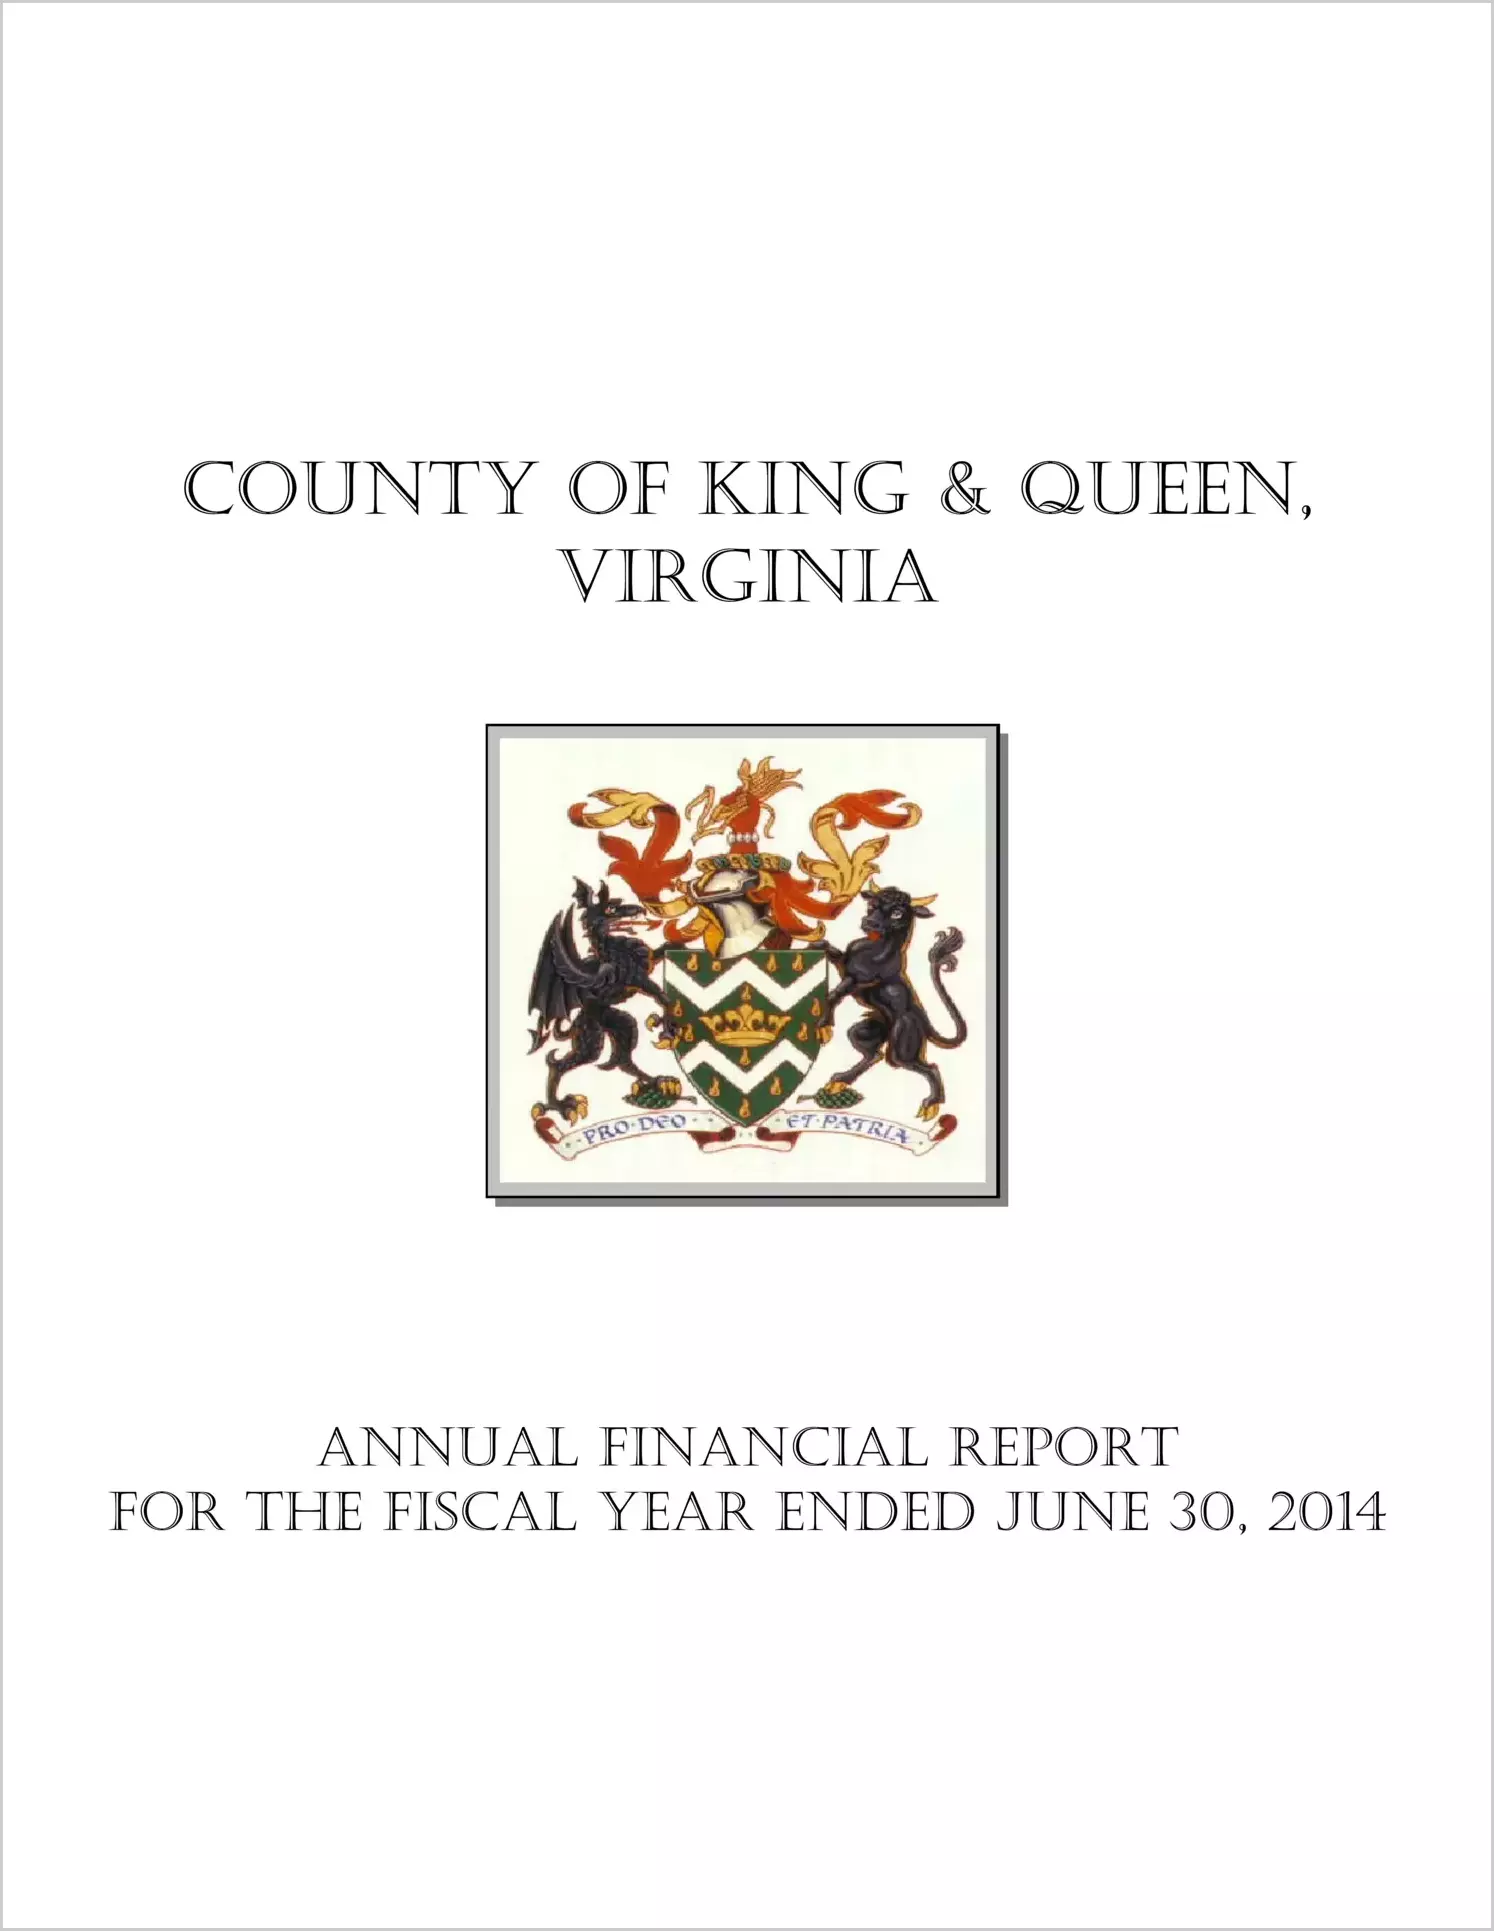 2014 Annual Financial Report for County of King and Queen